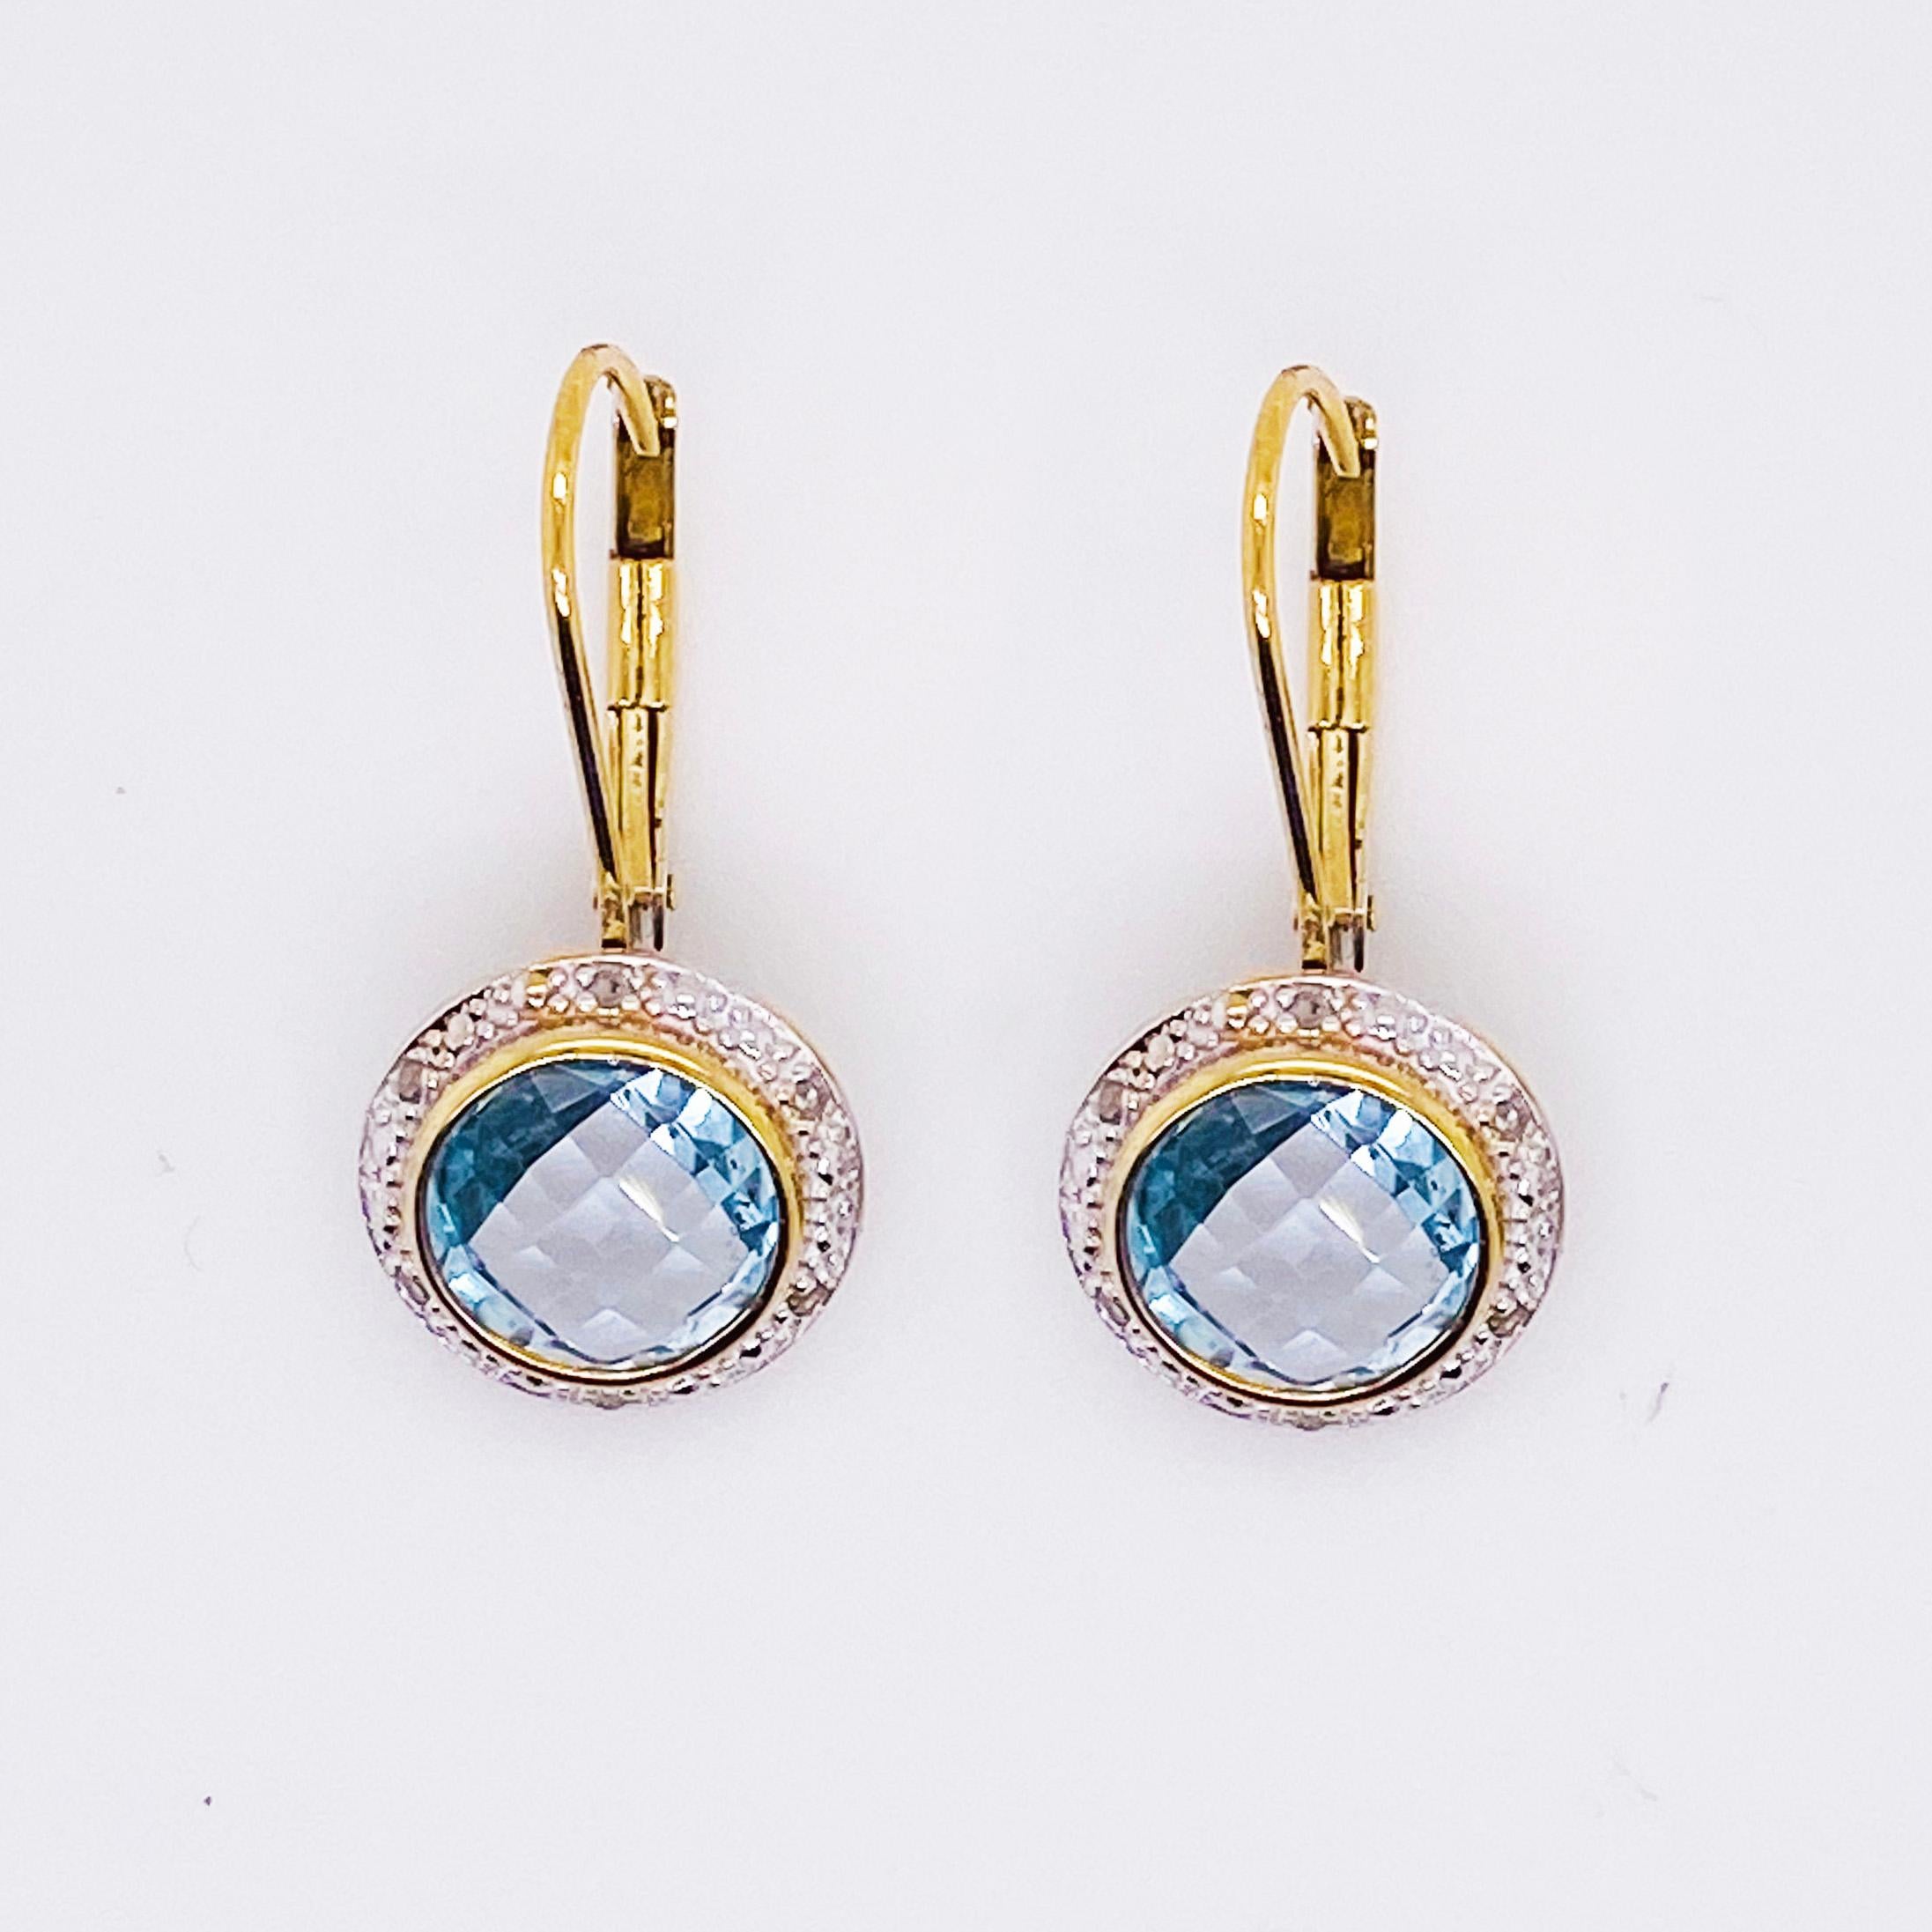 Round Cut Blue Topaz and Diamond Halo Earring Drops Sterling Silver and 14 Karat Gold